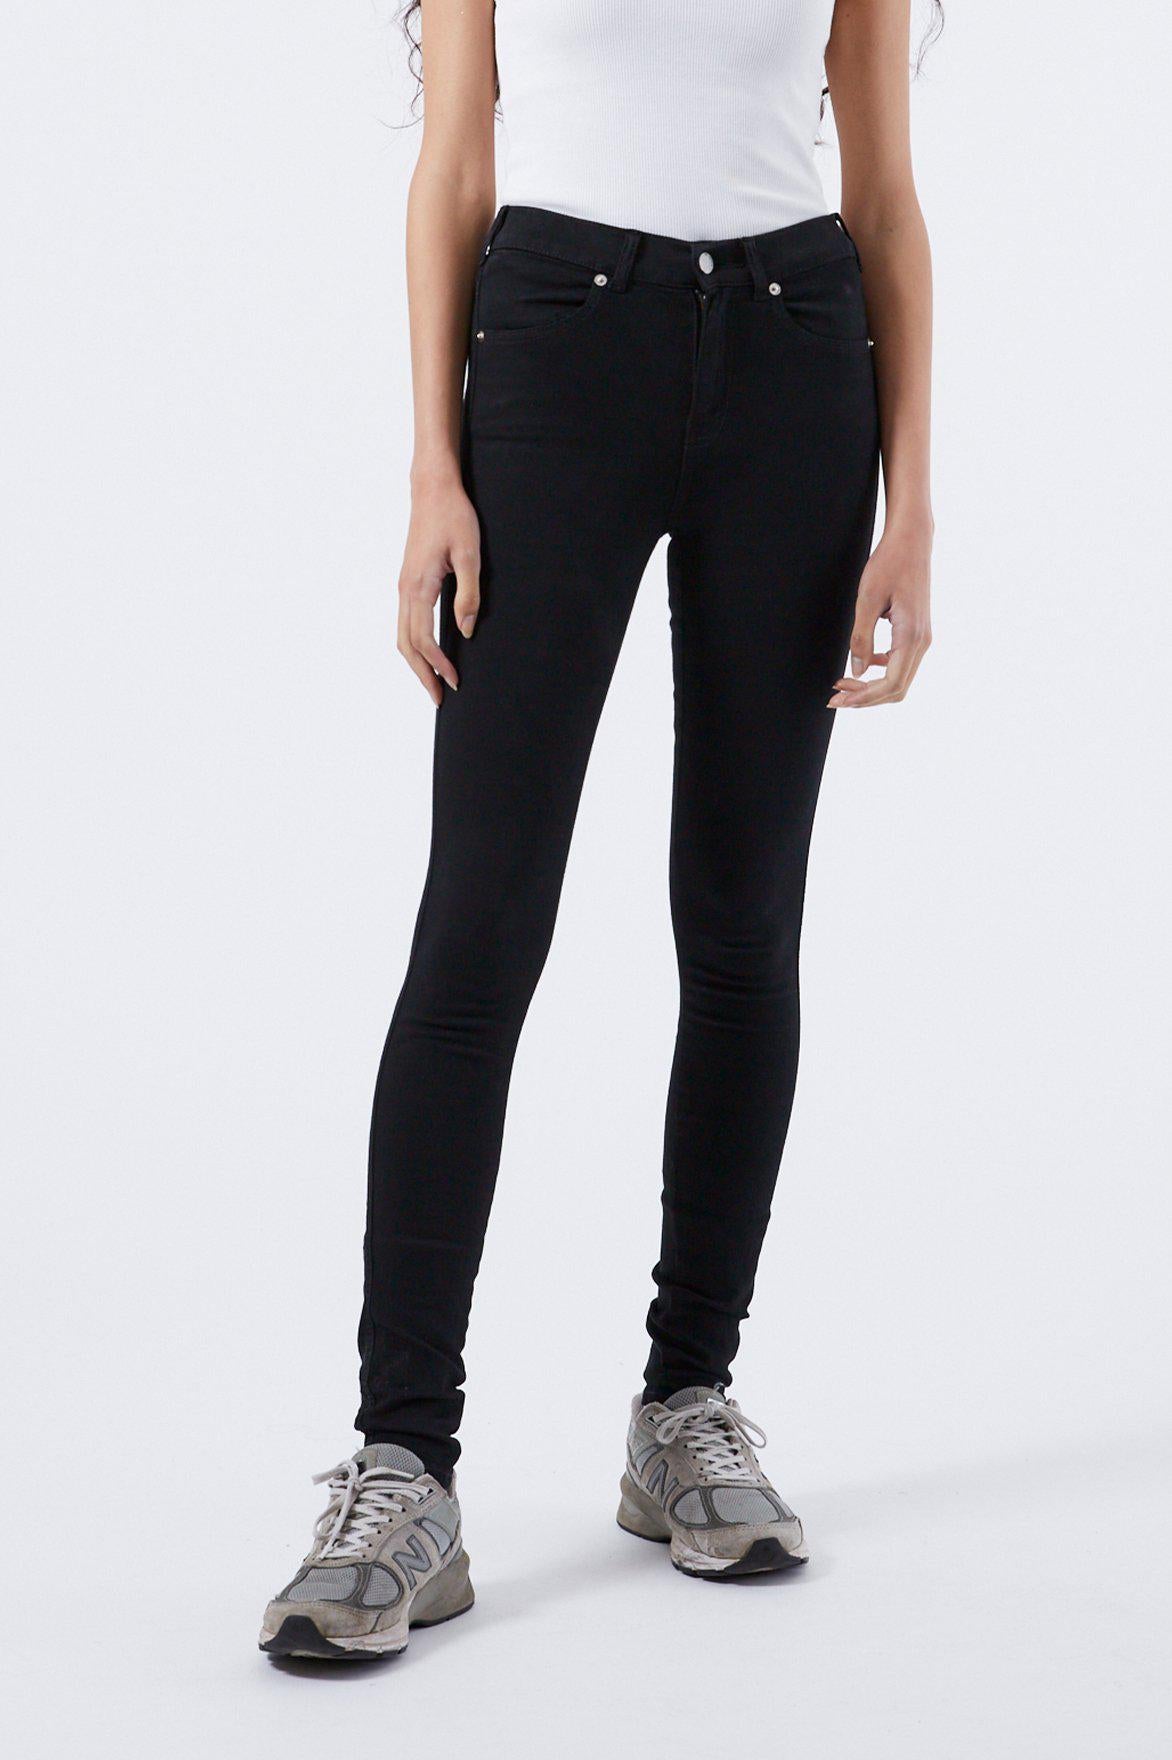 Lexy black skinny jeans mid rise